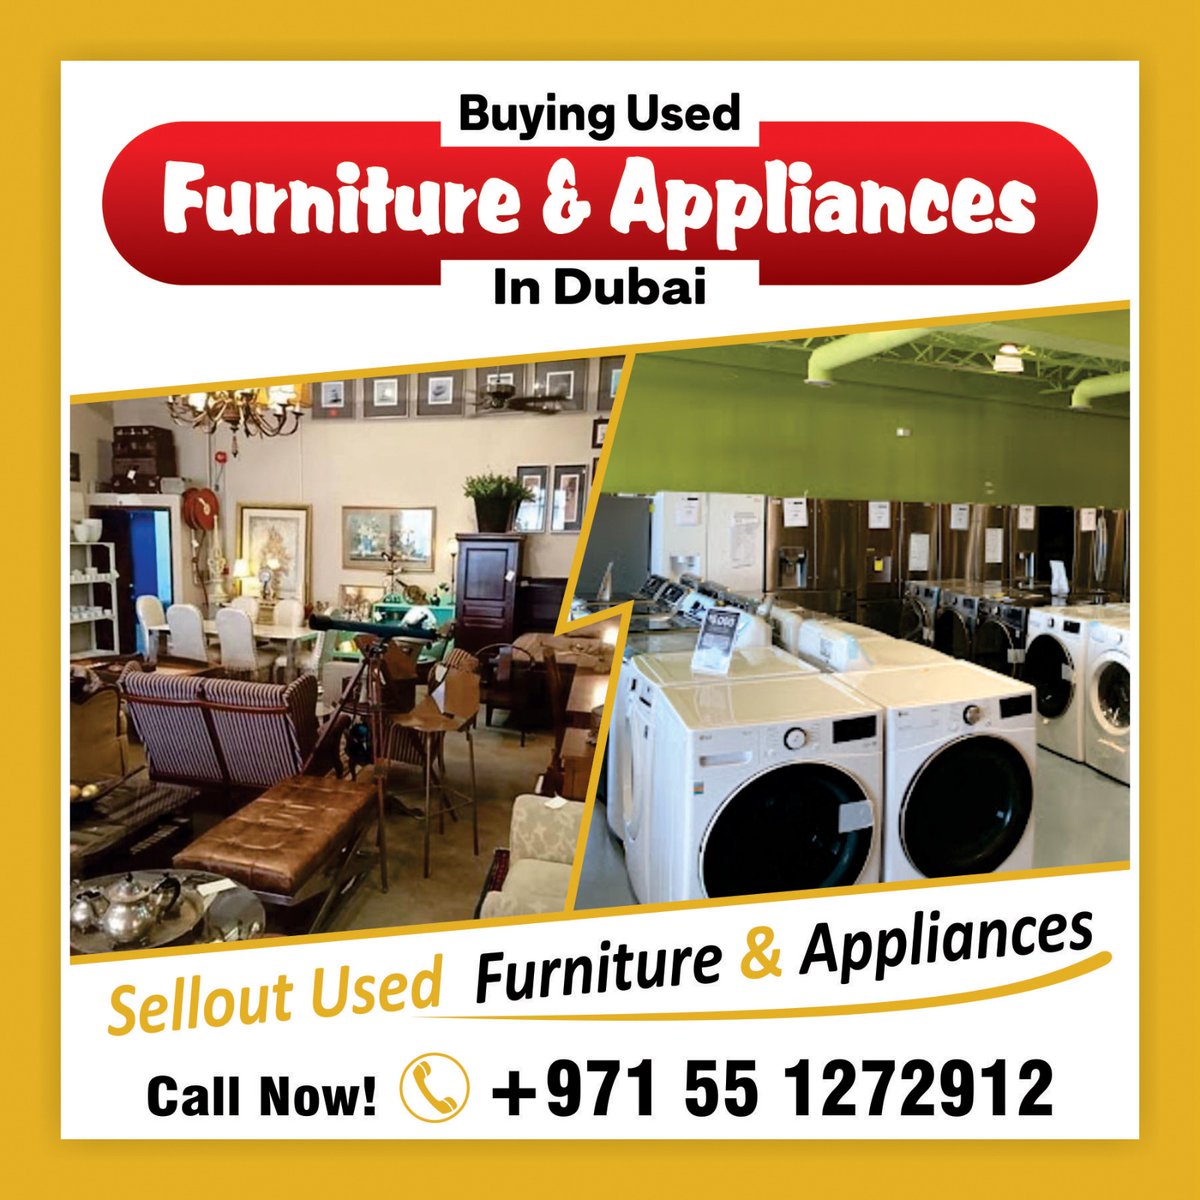 Sell your Junks for Cash💰
We buying used furniture and Home appliances at good price in dubai, ajman and sharjah.
get free quote: 0551272912

#dubaifurniture #dubai #homedecor #interiordesign #dubaiinteriors #uae #dubaihomedecor #furniture #mydubai #uaefurniture #usedappliances